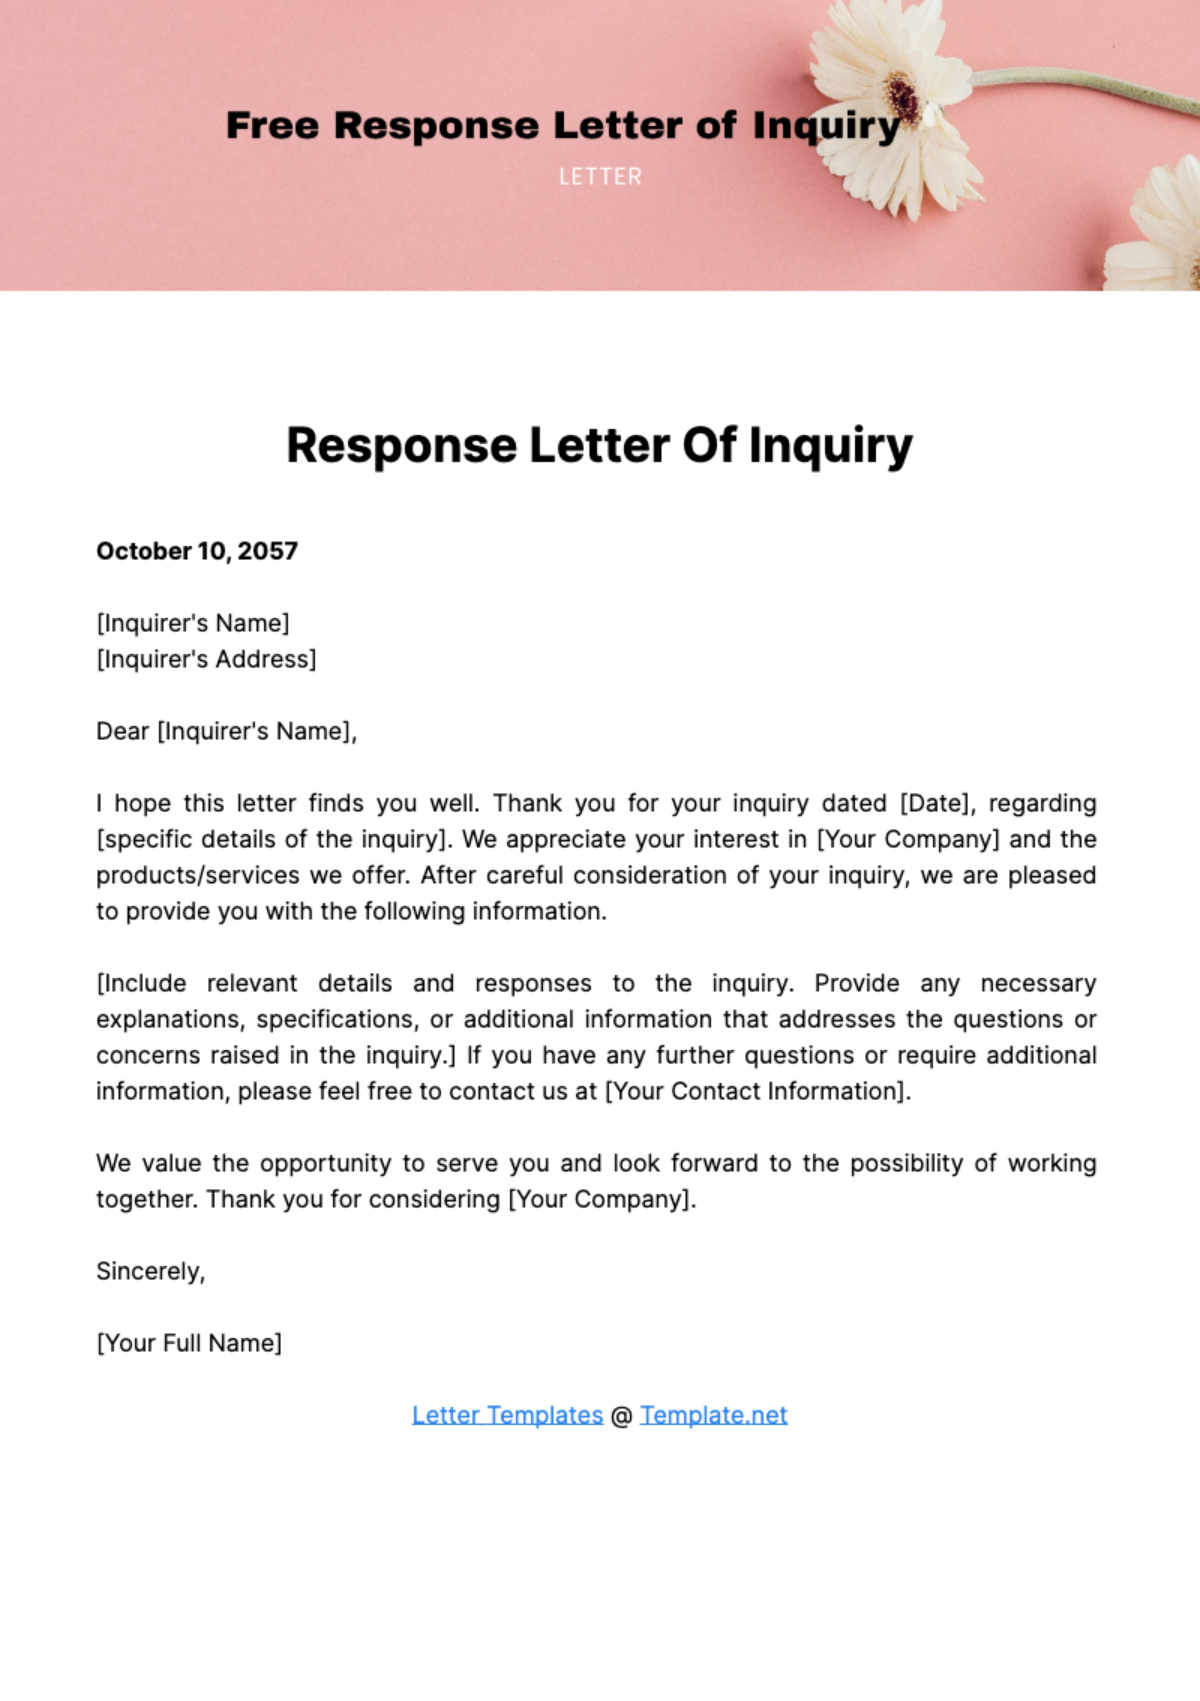 Free Response Letter of Inquiry Template